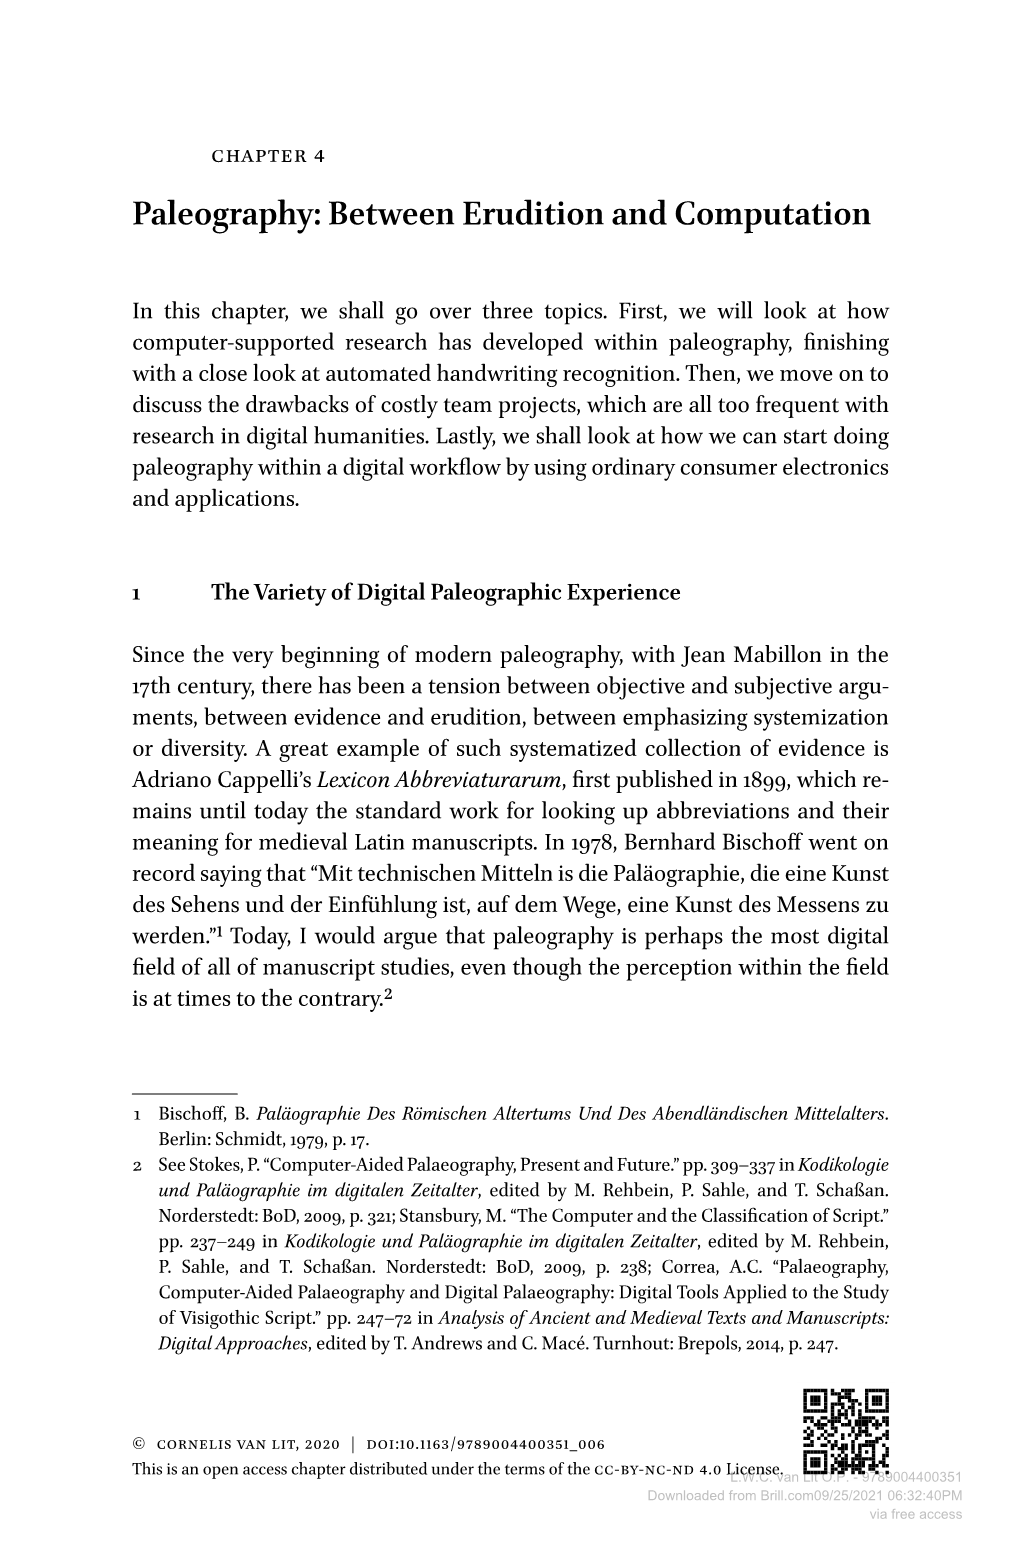 Paleography: Between Erudition and Computation